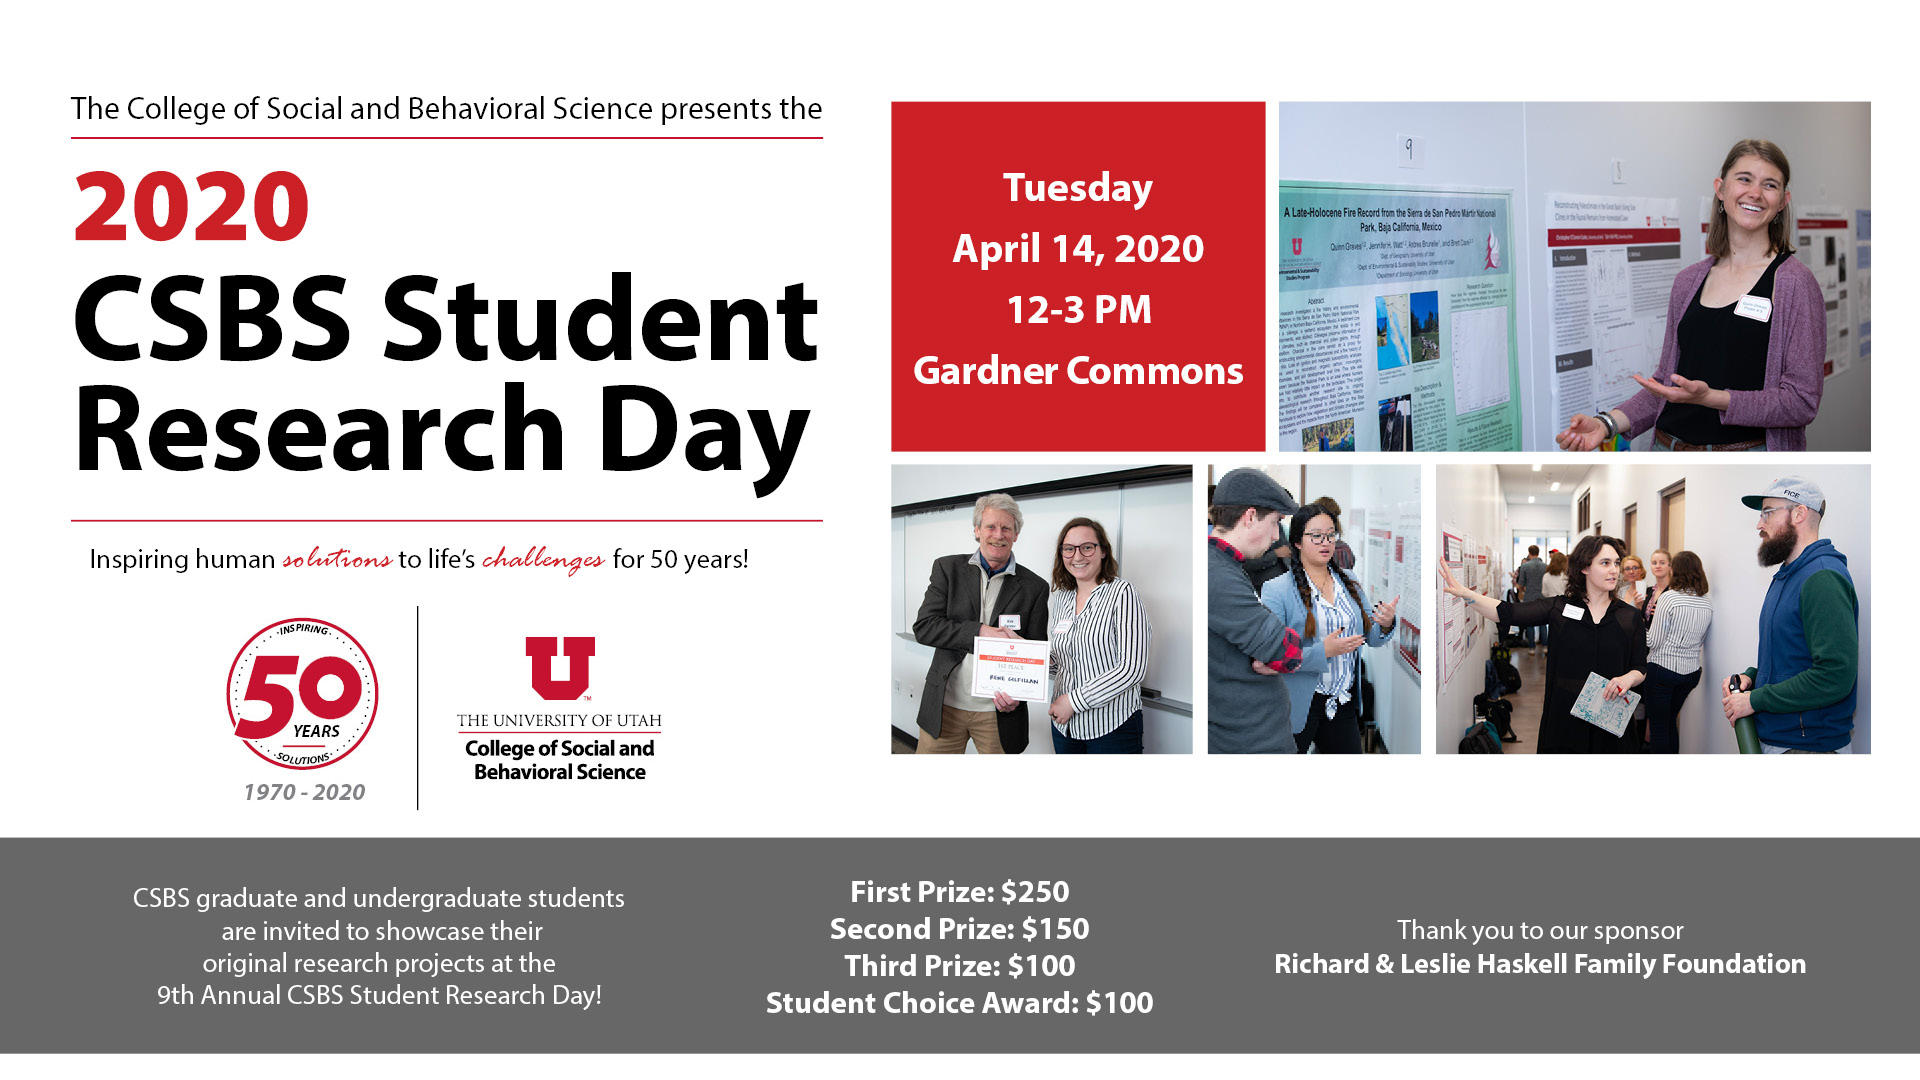 student research day banner